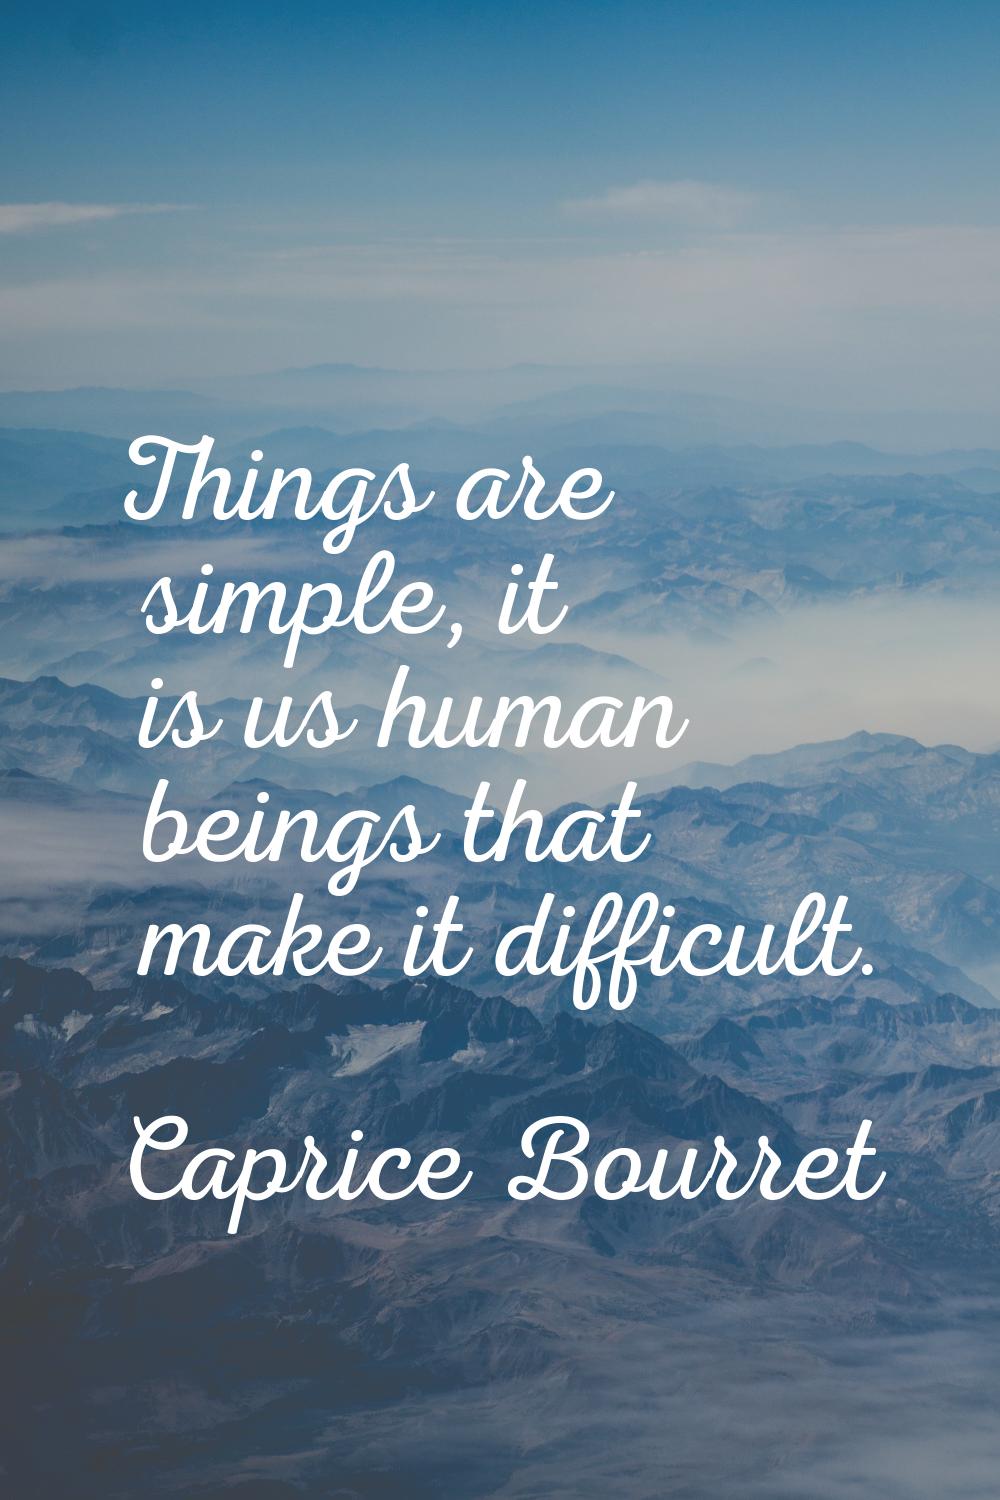 Things are simple, it is us human beings that make it difficult.